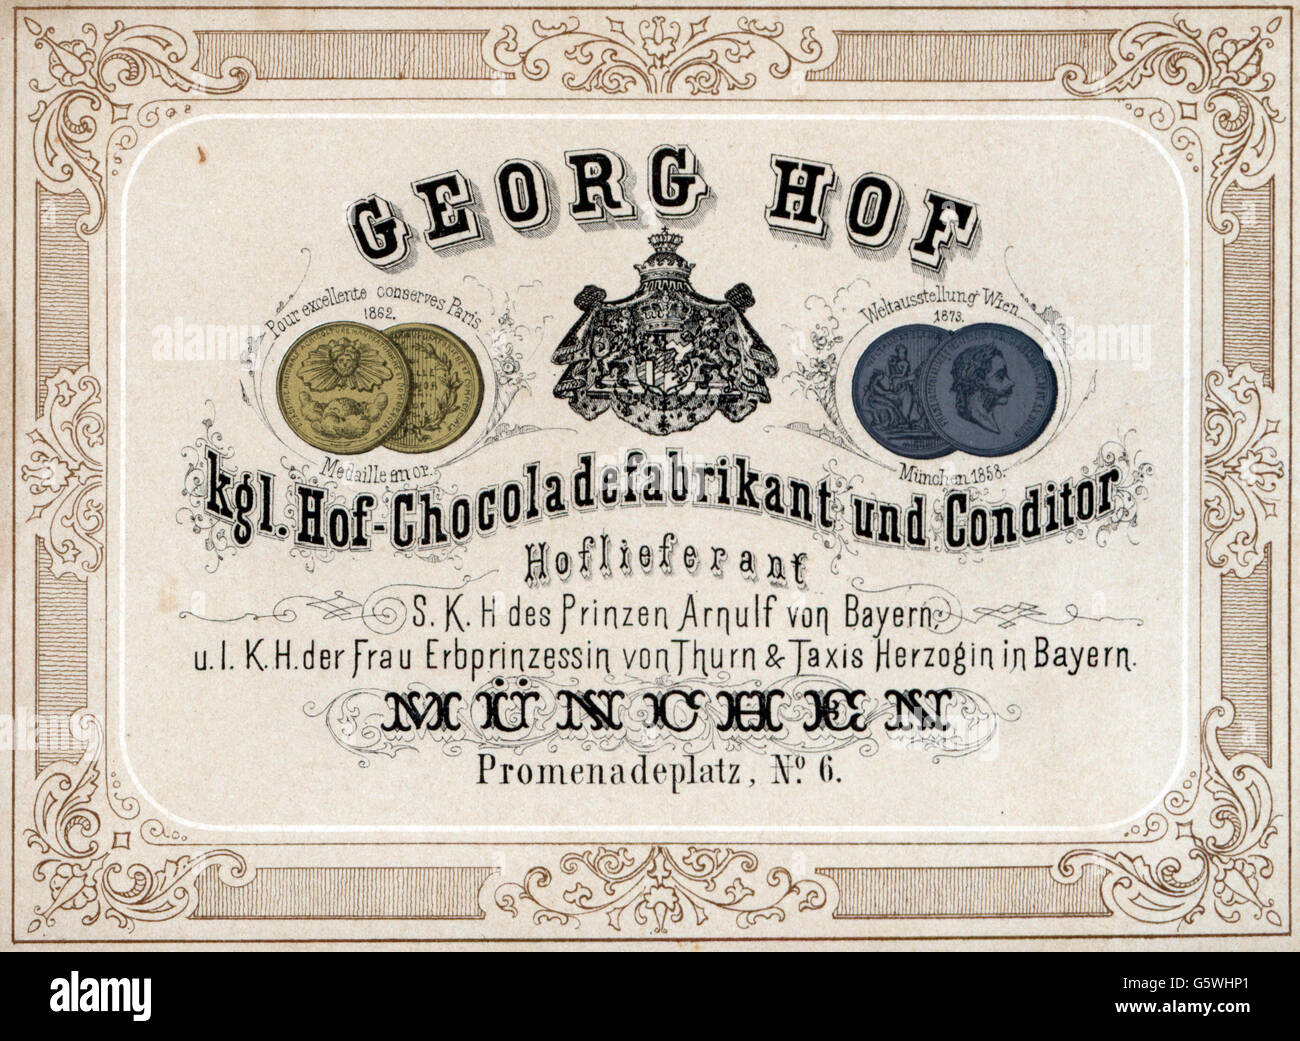 advertising, food, chocolate, label of the chocolate manufacturer and confectioner Georg Hof, Munich, late 19th century, Royal Bavarian warrant of appointment, coat of arms, Kingdom of Bavaria, industry, industries, German Empire, Imperial Era, food, foodstuff, chocolate, chocolates, label, labels, historic, historical, Additional-Rights-Clearences-Not Available Stock Photo